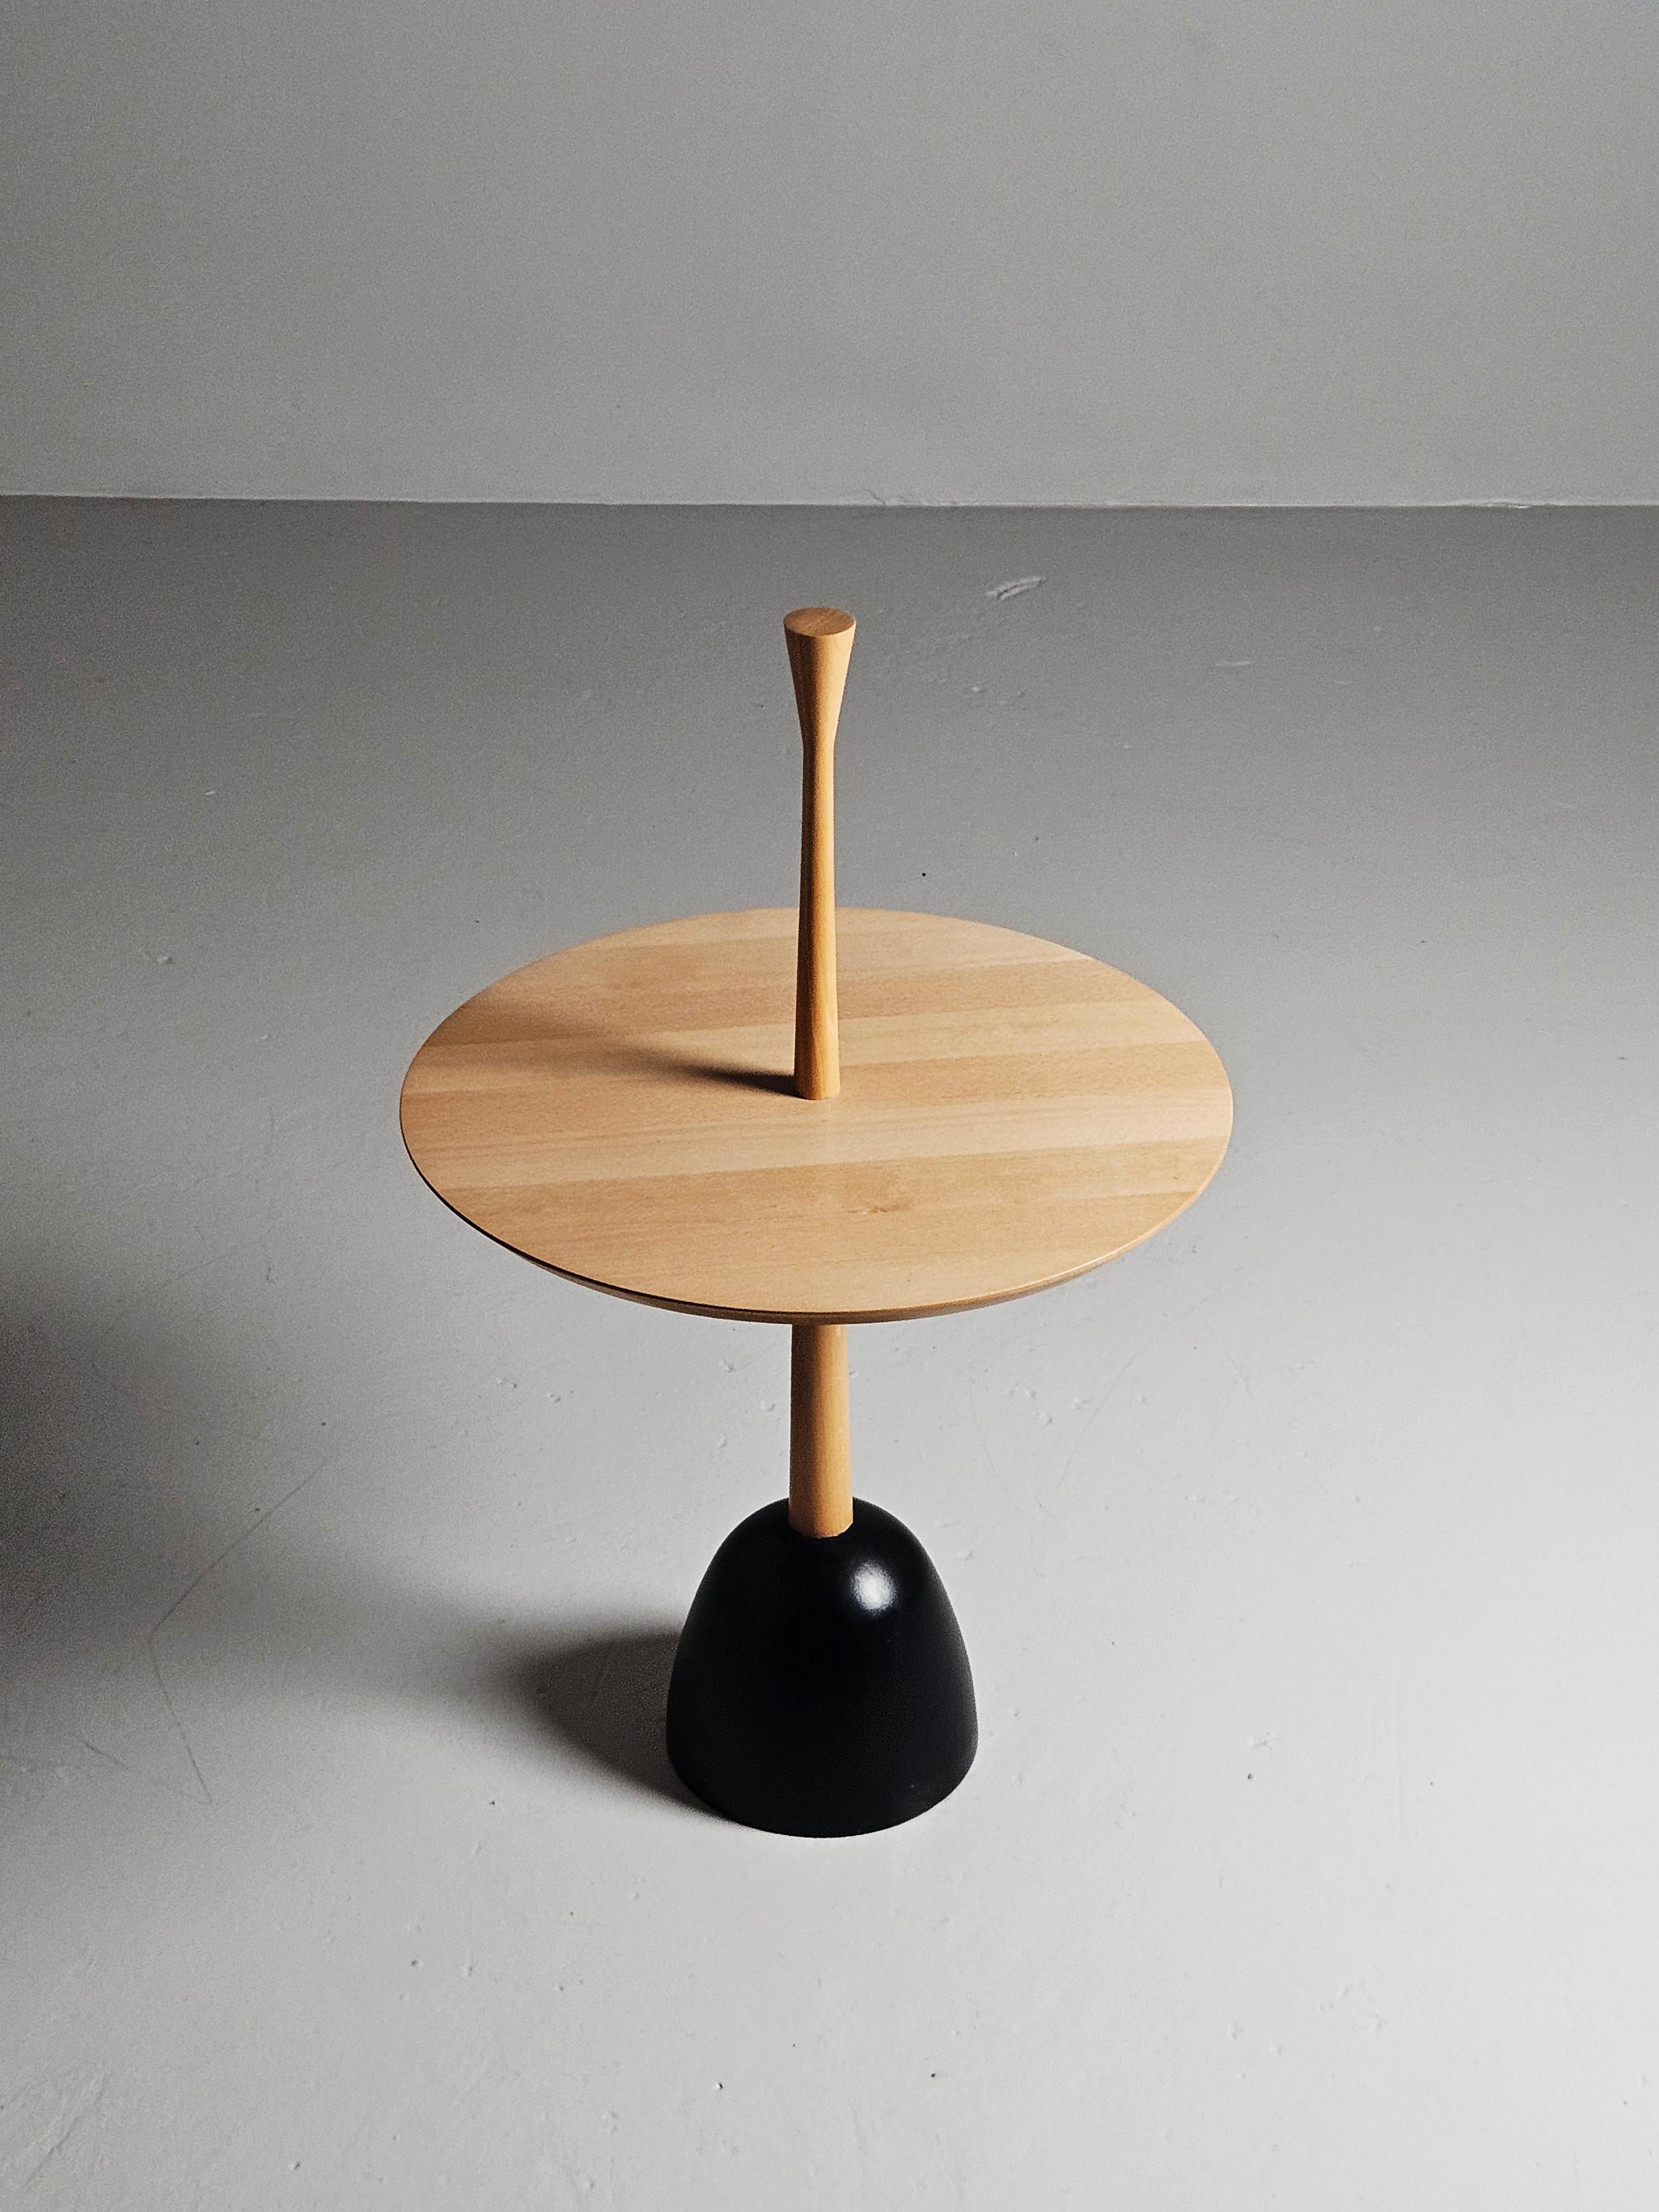 Coffee table produced by Haslev in Denmark during the 1960s.

Made in solid oak mounted on a cast iron foot. Table top is rotatable around the pillar. 

Total height with pillar is 31,10 in(79cm).

